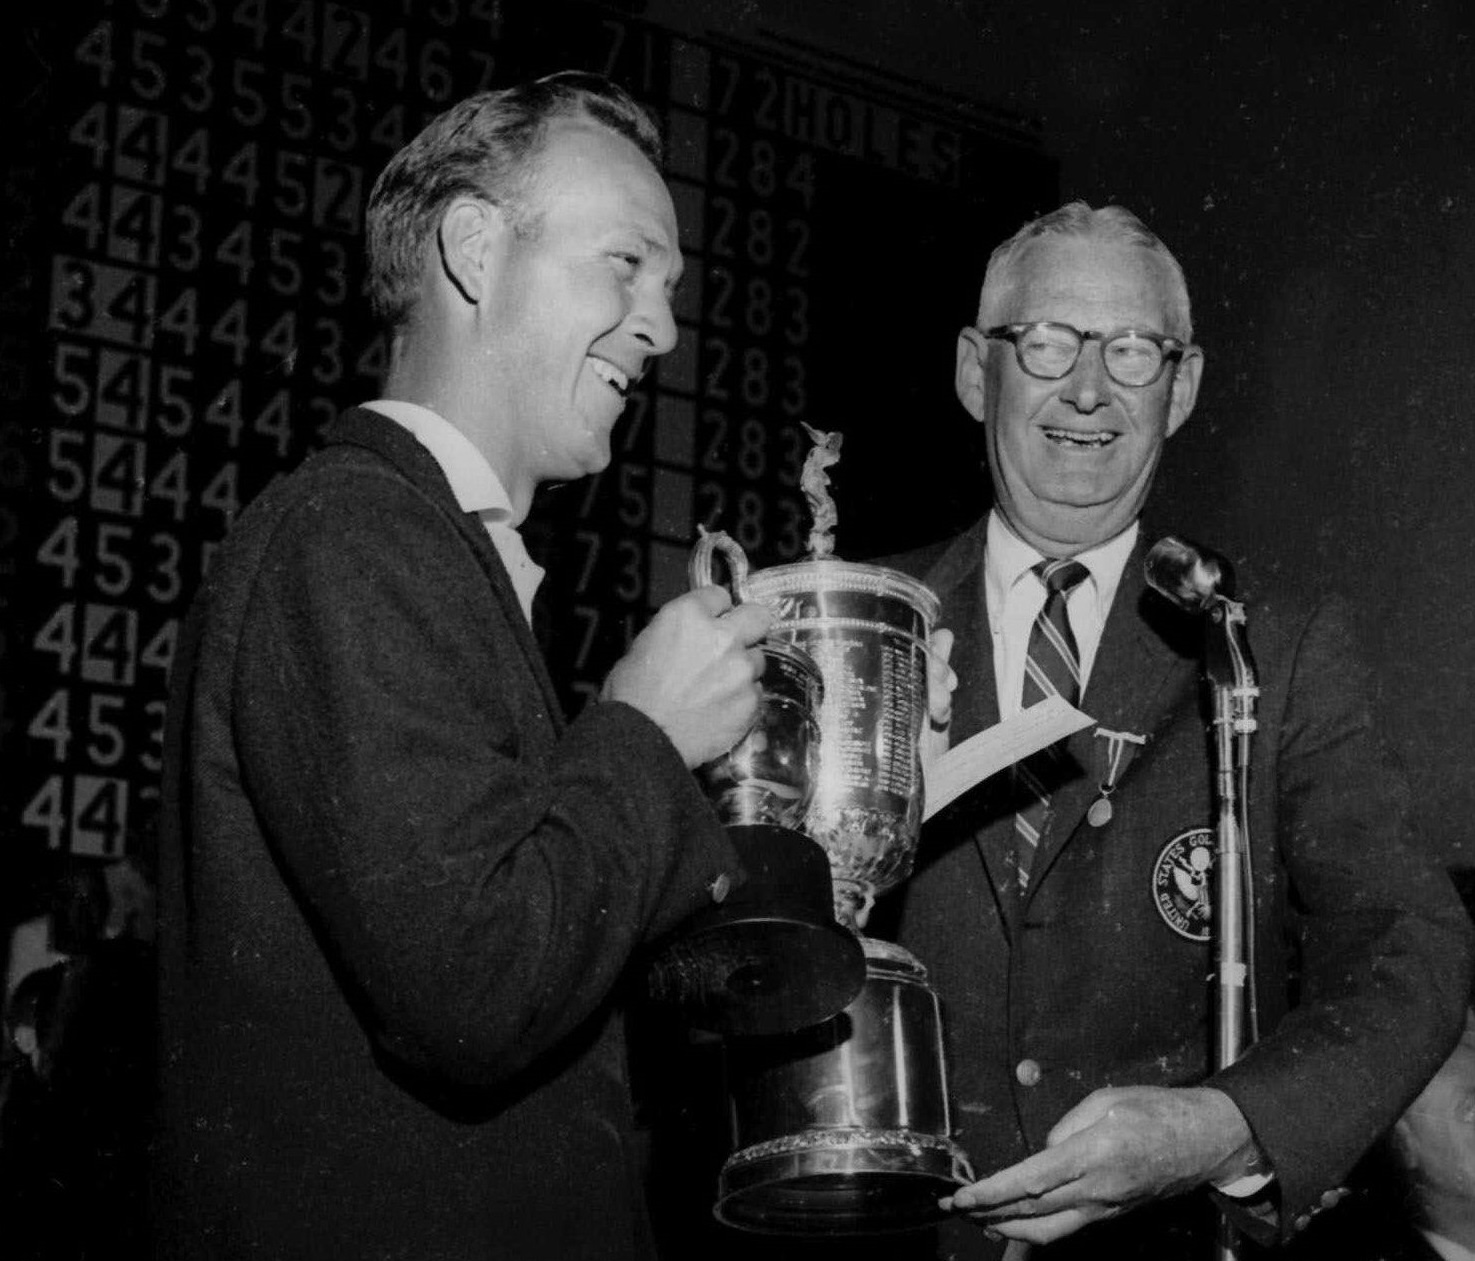 John Clock, president of the USGA, presents the U.S. Open trophy to Arnold Palmer, left, at the Cherry Hills Country Club in Denver in 1960. (Associated Press file)